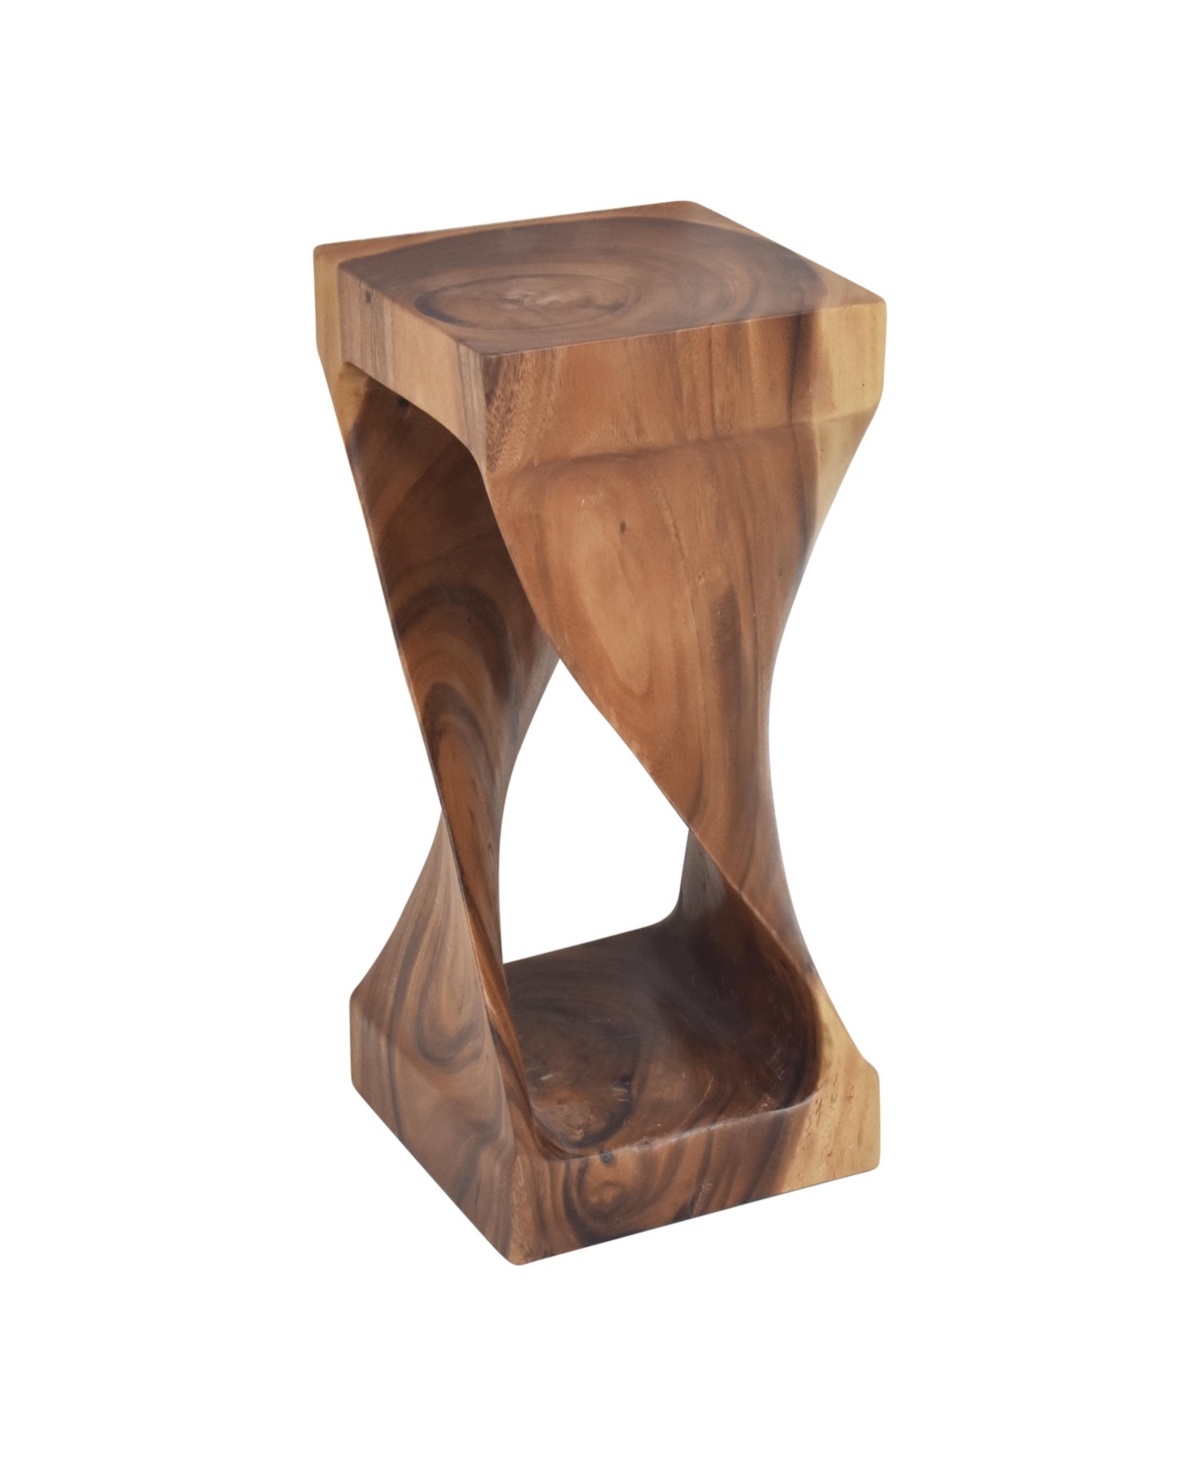 Steve Silver Solana 12" Square Solid Acacia Wood Accent Side Table In Natural Wood Glaze